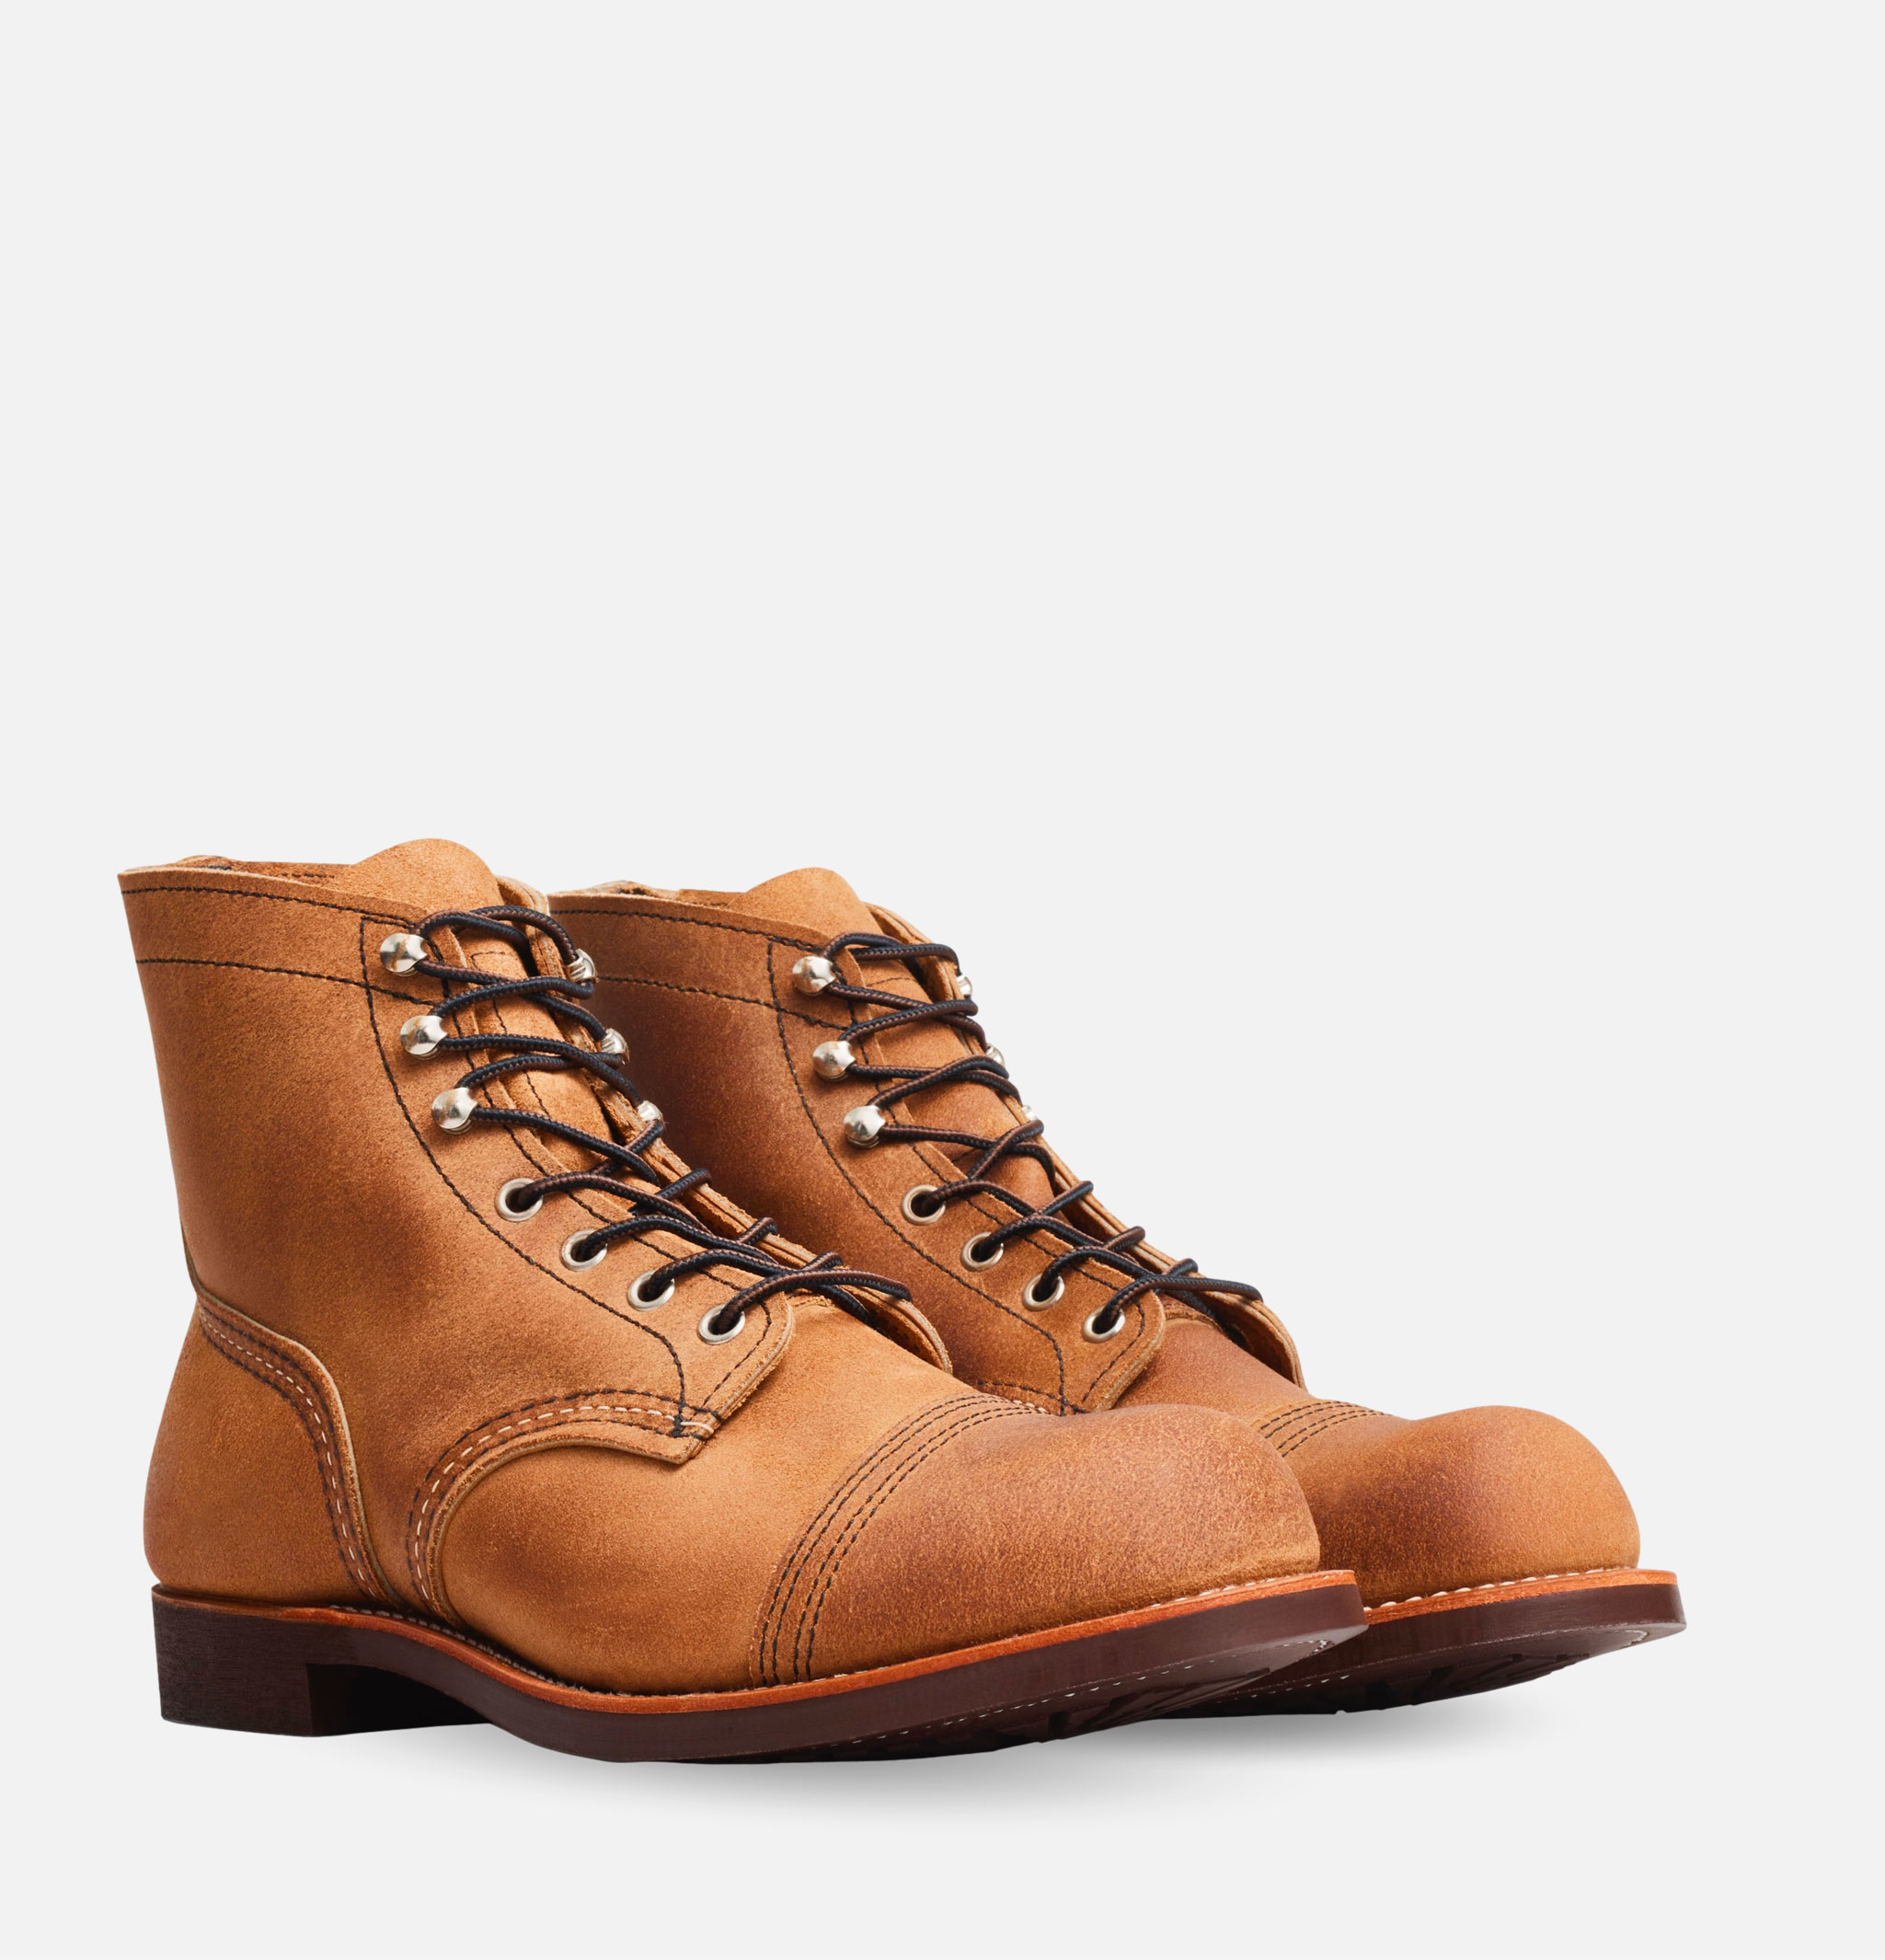 Red Wing Shoes - 8083 - Iron Ranger Hawthorne